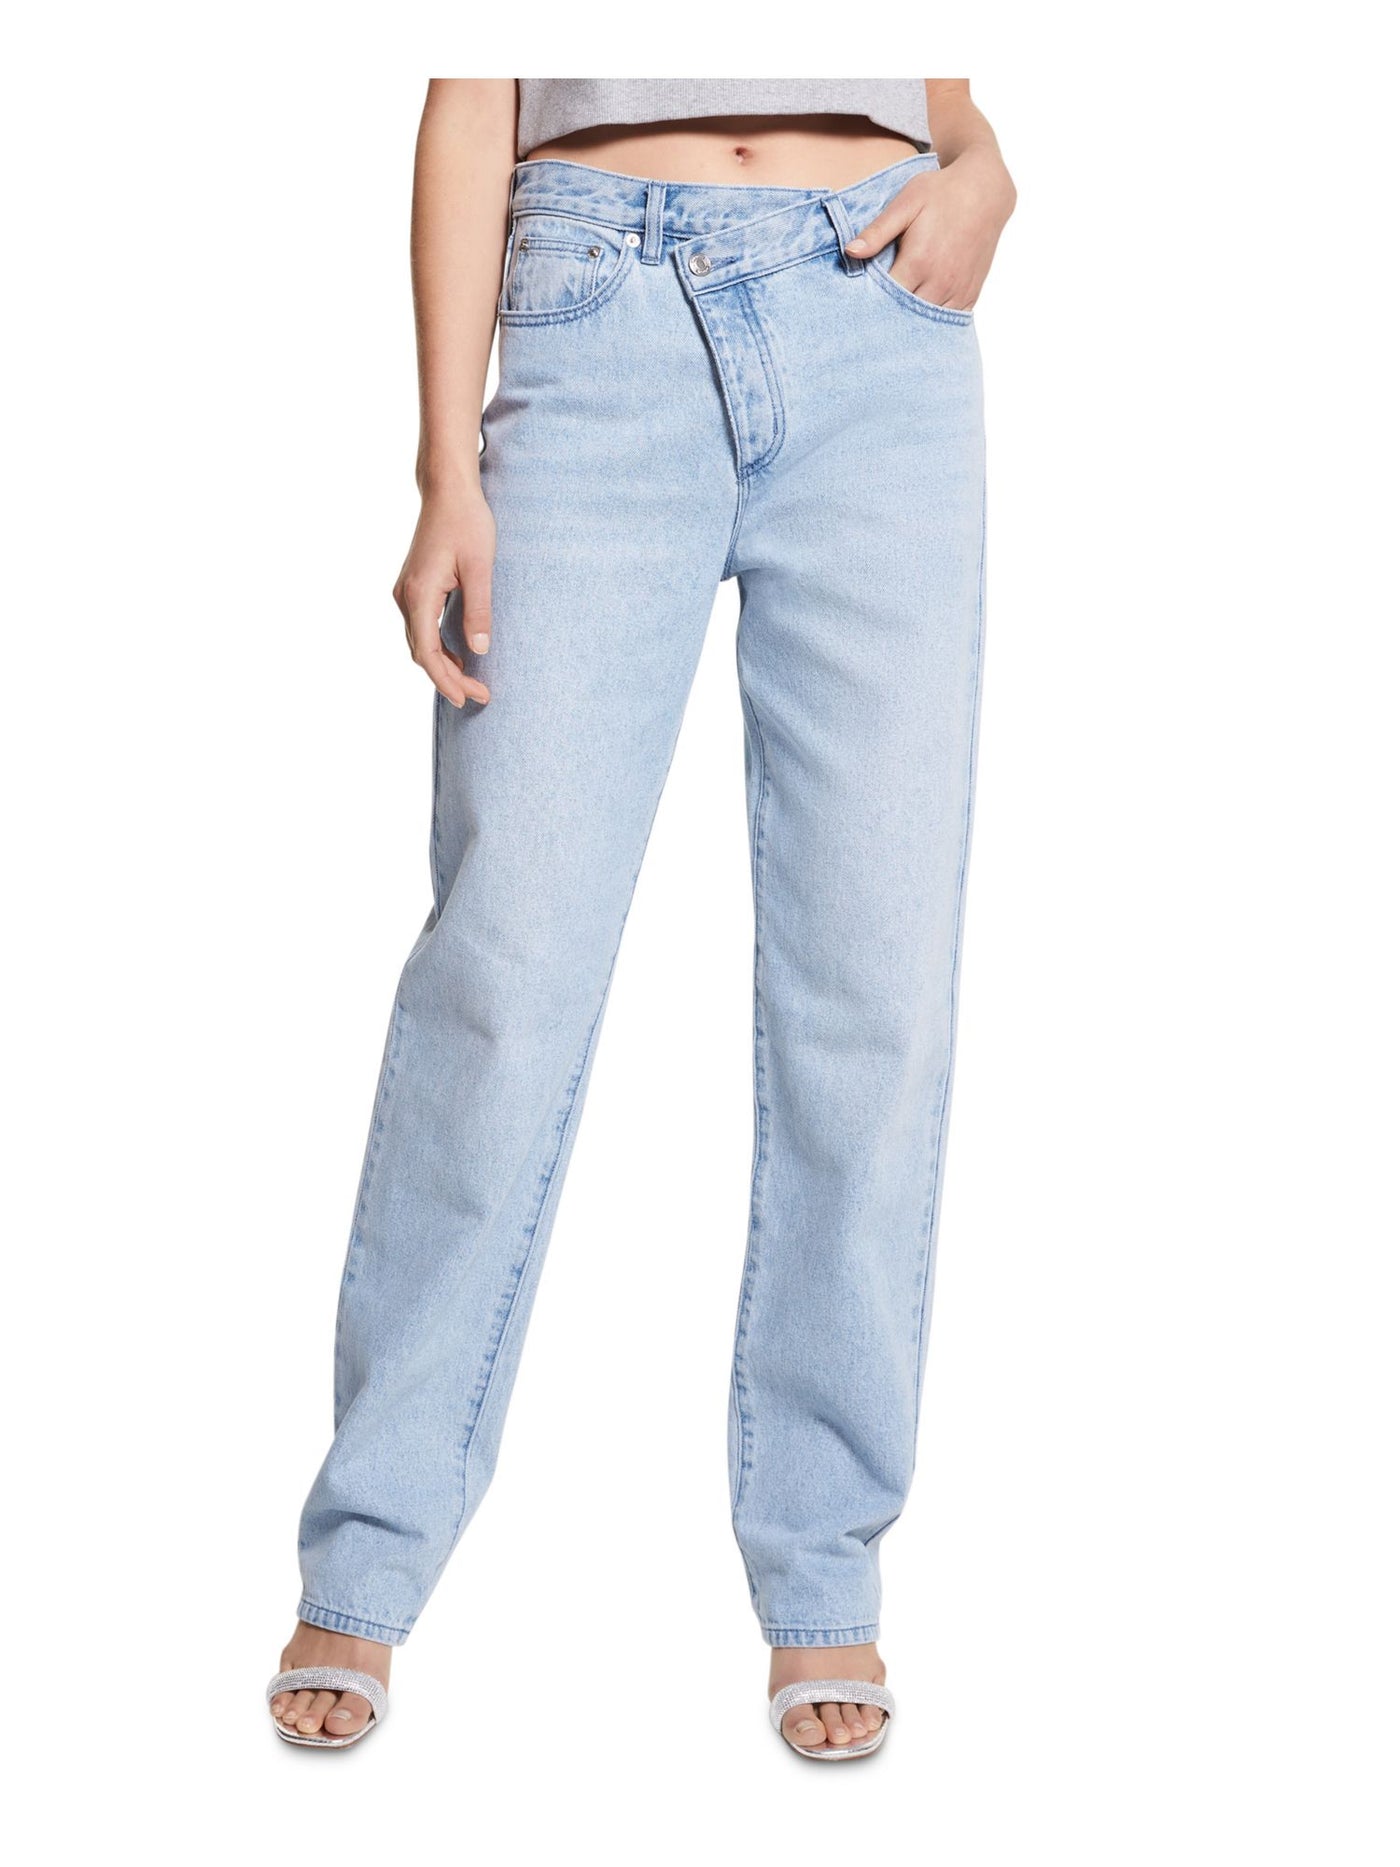 MICHAEL KORS Womens Light Blue Pocketed Crossover Button Fly Wide Leg Jeans 10